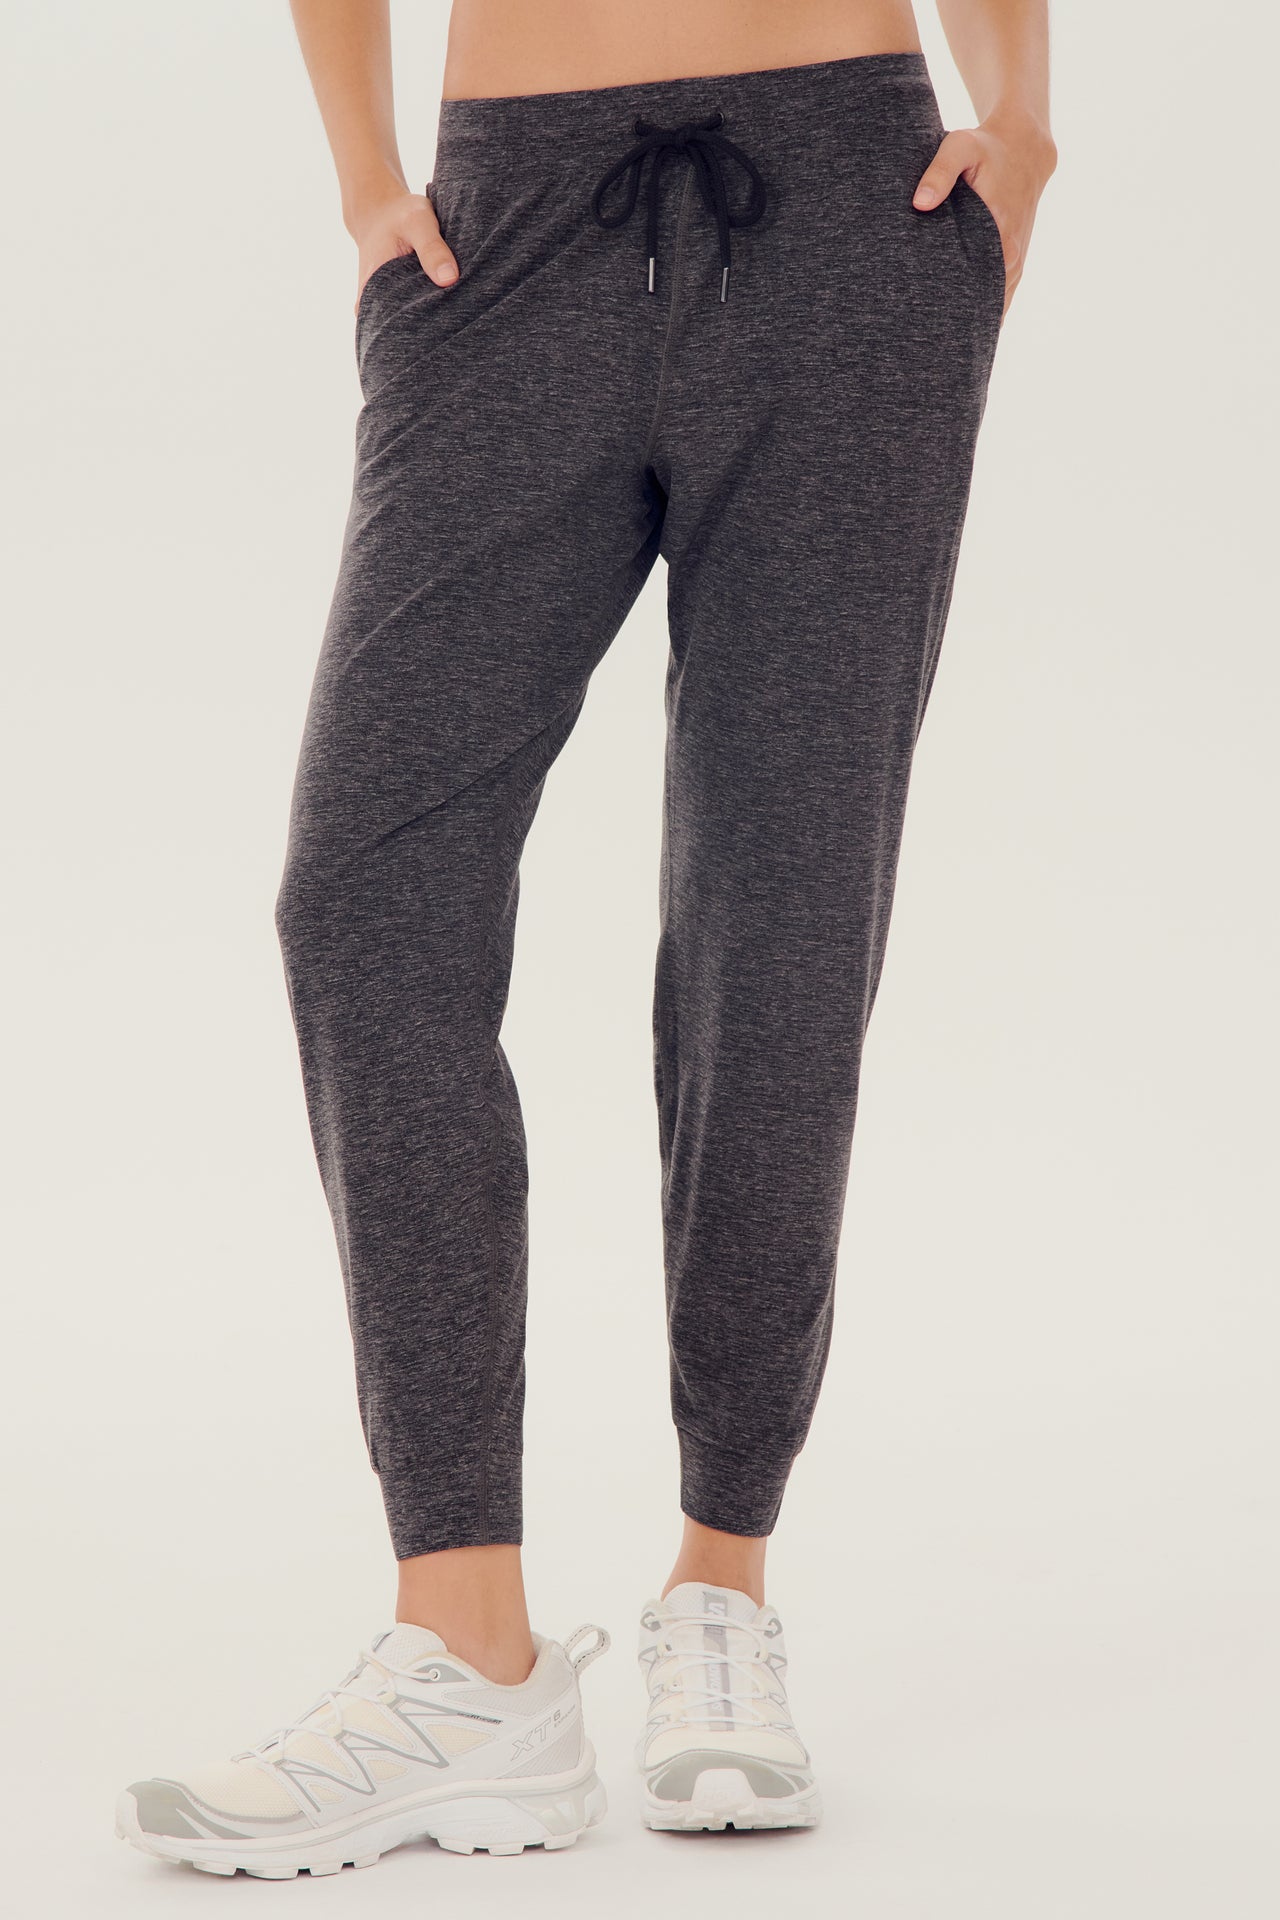 Front view of girl wearing dark grey sweatpants with black tie around waistband with white shoes 